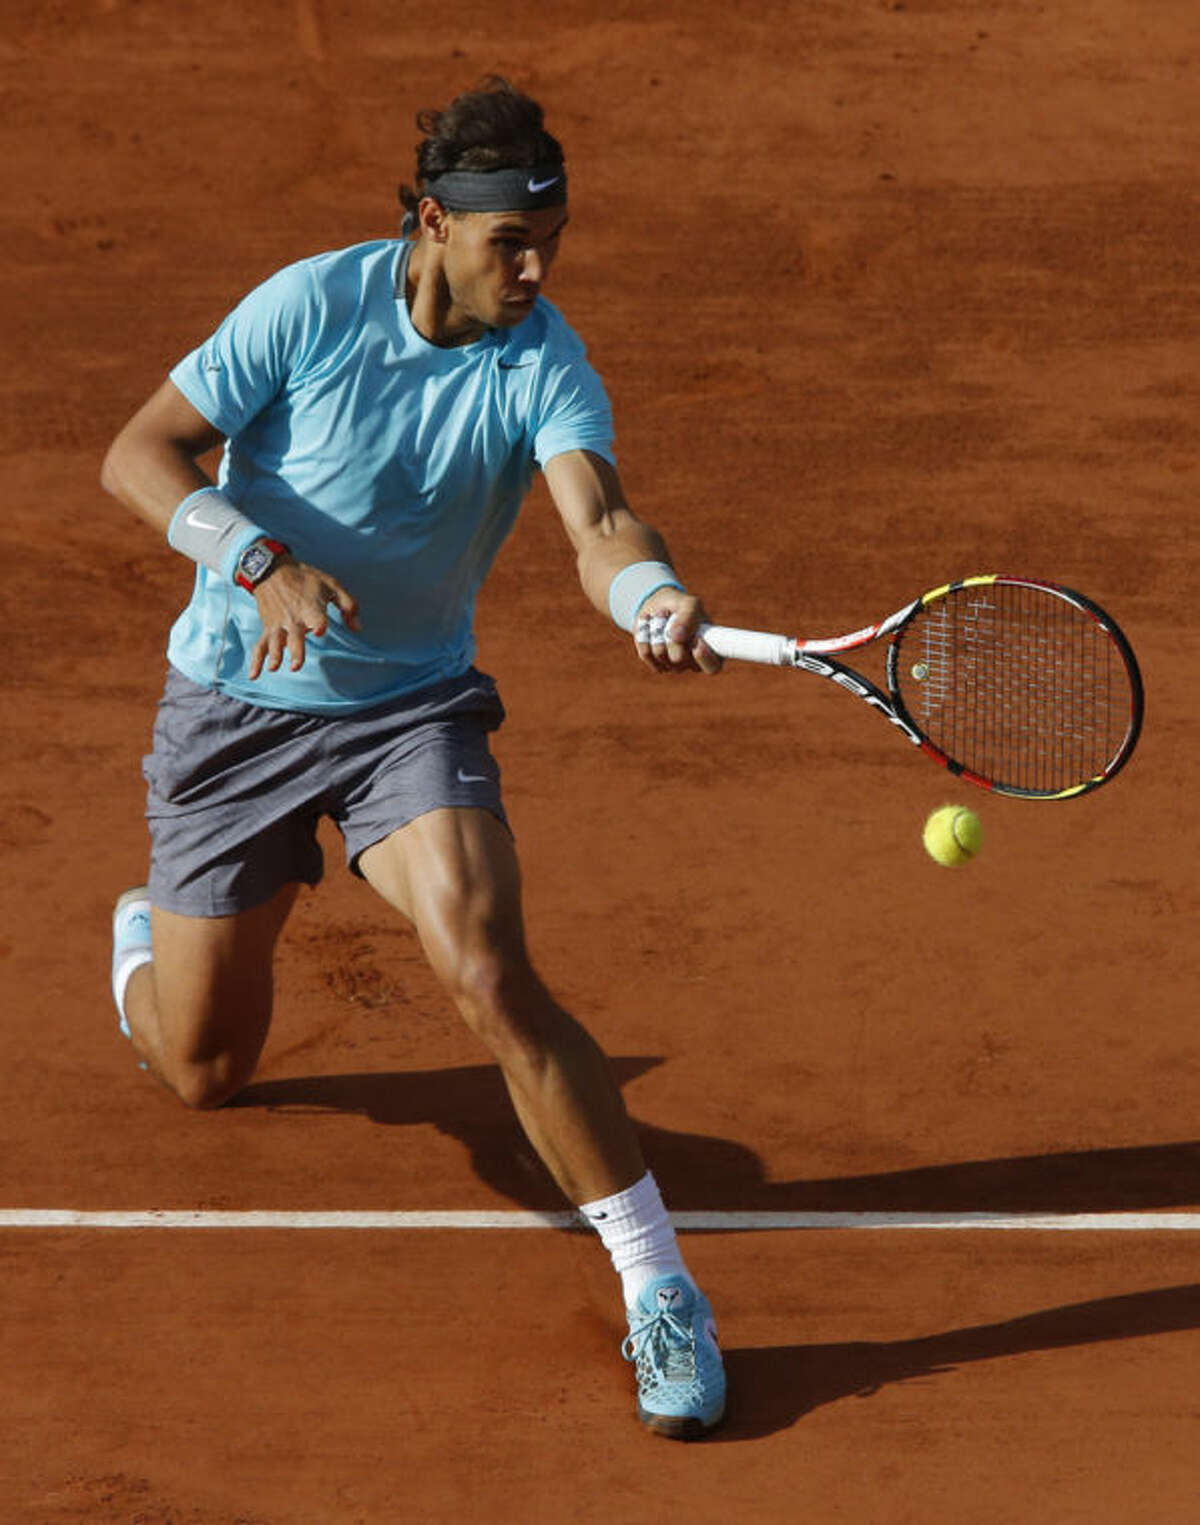 Spain's Rafael Nadal returns the ball during the quarterfinal match of the French Open tennis tournament against Spain's David Ferrer at the Roland Garros stadium, in Paris, France, Wednesday, June 4, 2014. (AP Photo/Michel Spingler)